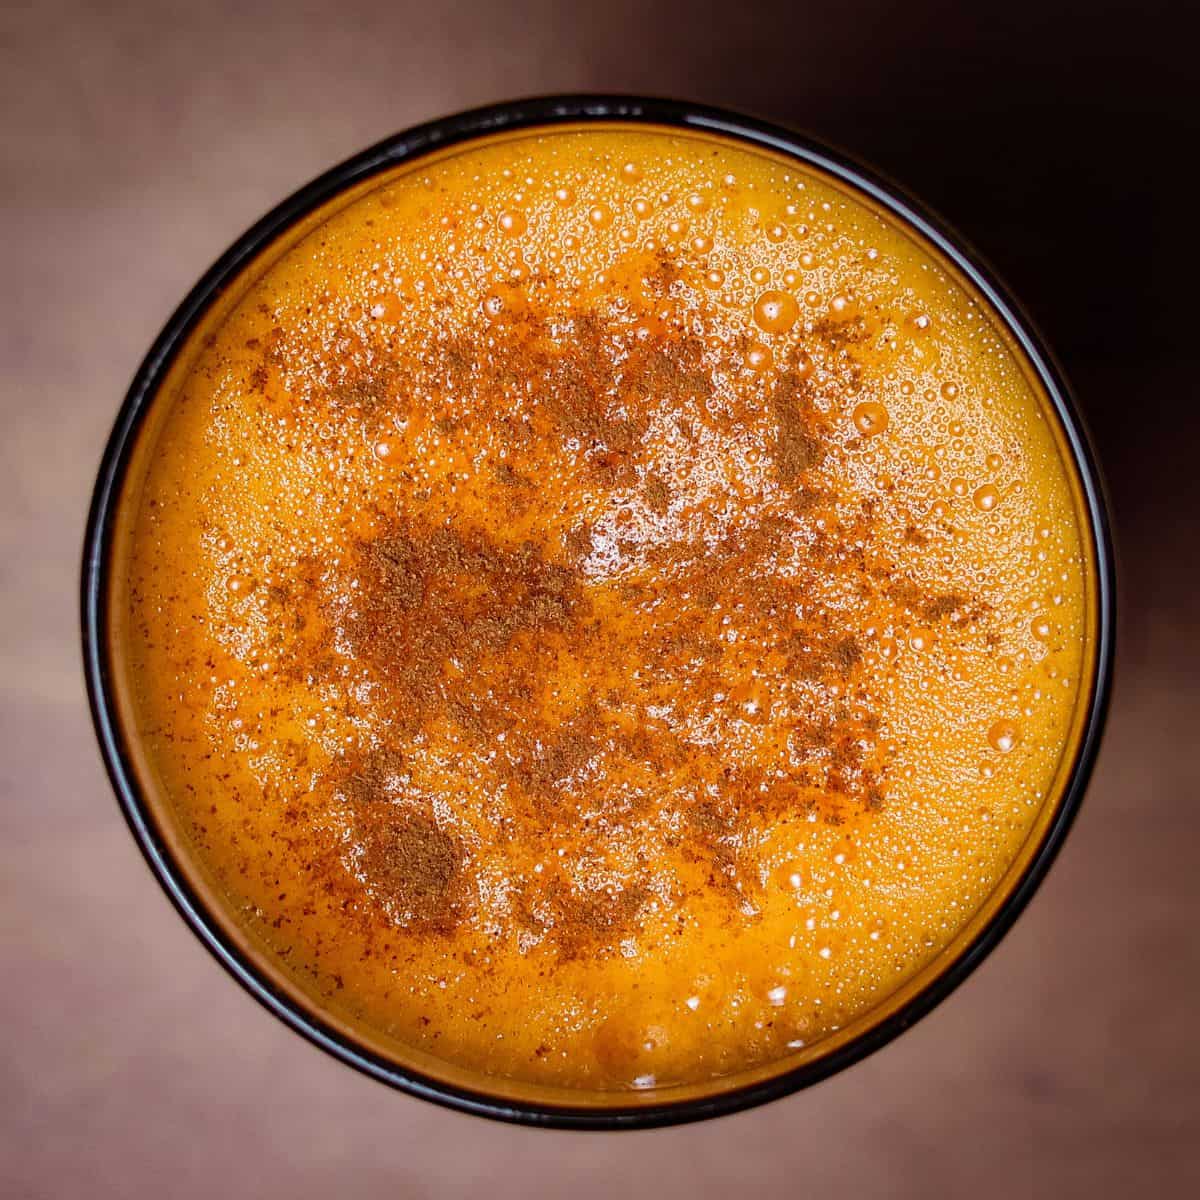 Top-down view of a frothy sweet potato juice in a circular glass, showing a rich texture sprinkled with ground cinnamon, reflecting a golden-orange color.